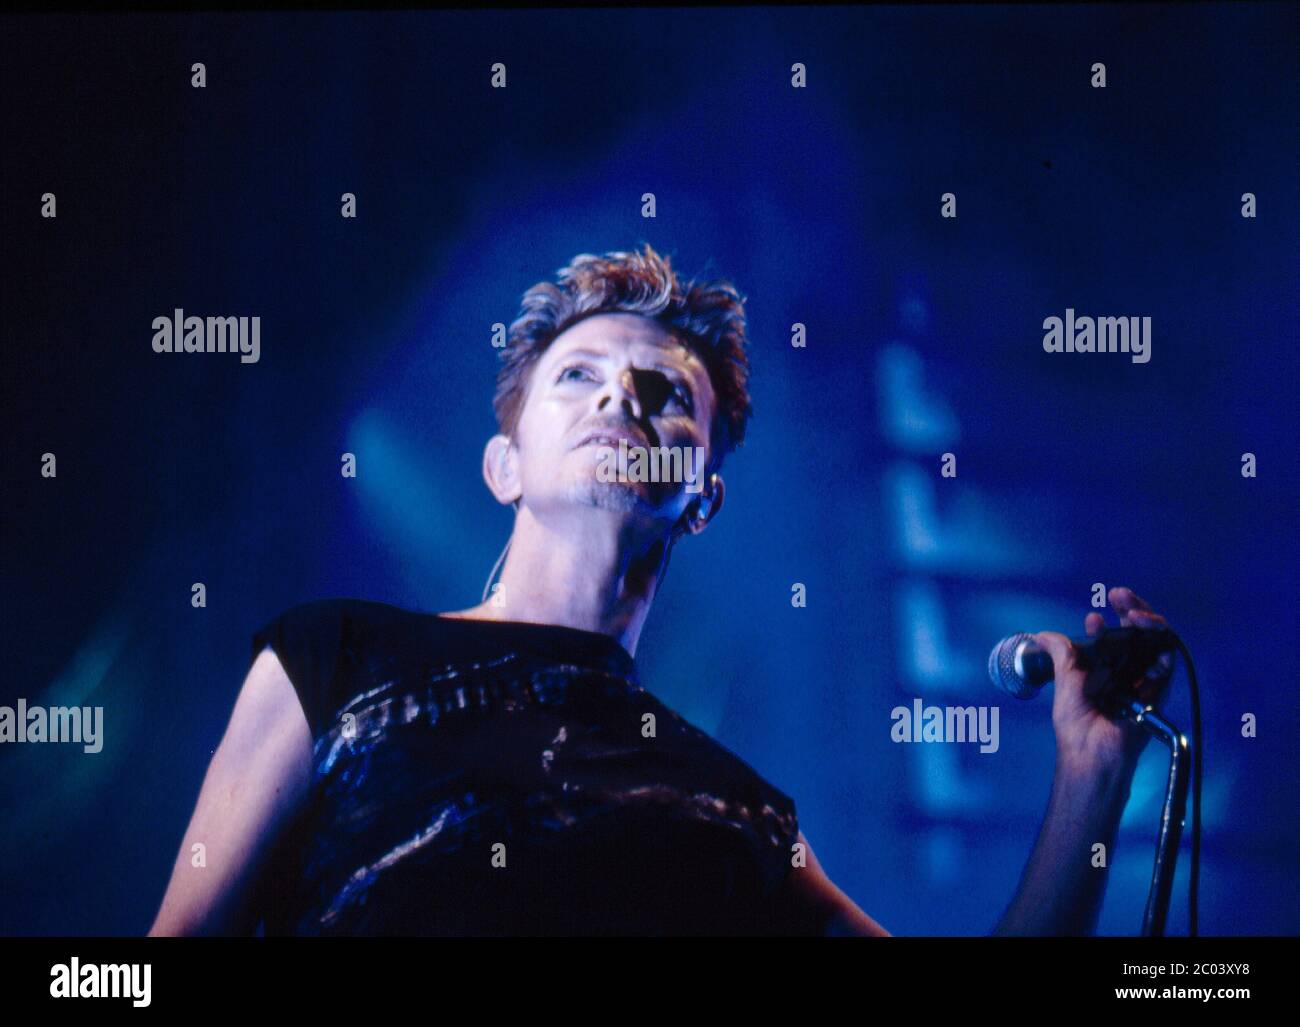 David Bowie in concert at Wembley Arena,London 17th November 1995 Stock Photo